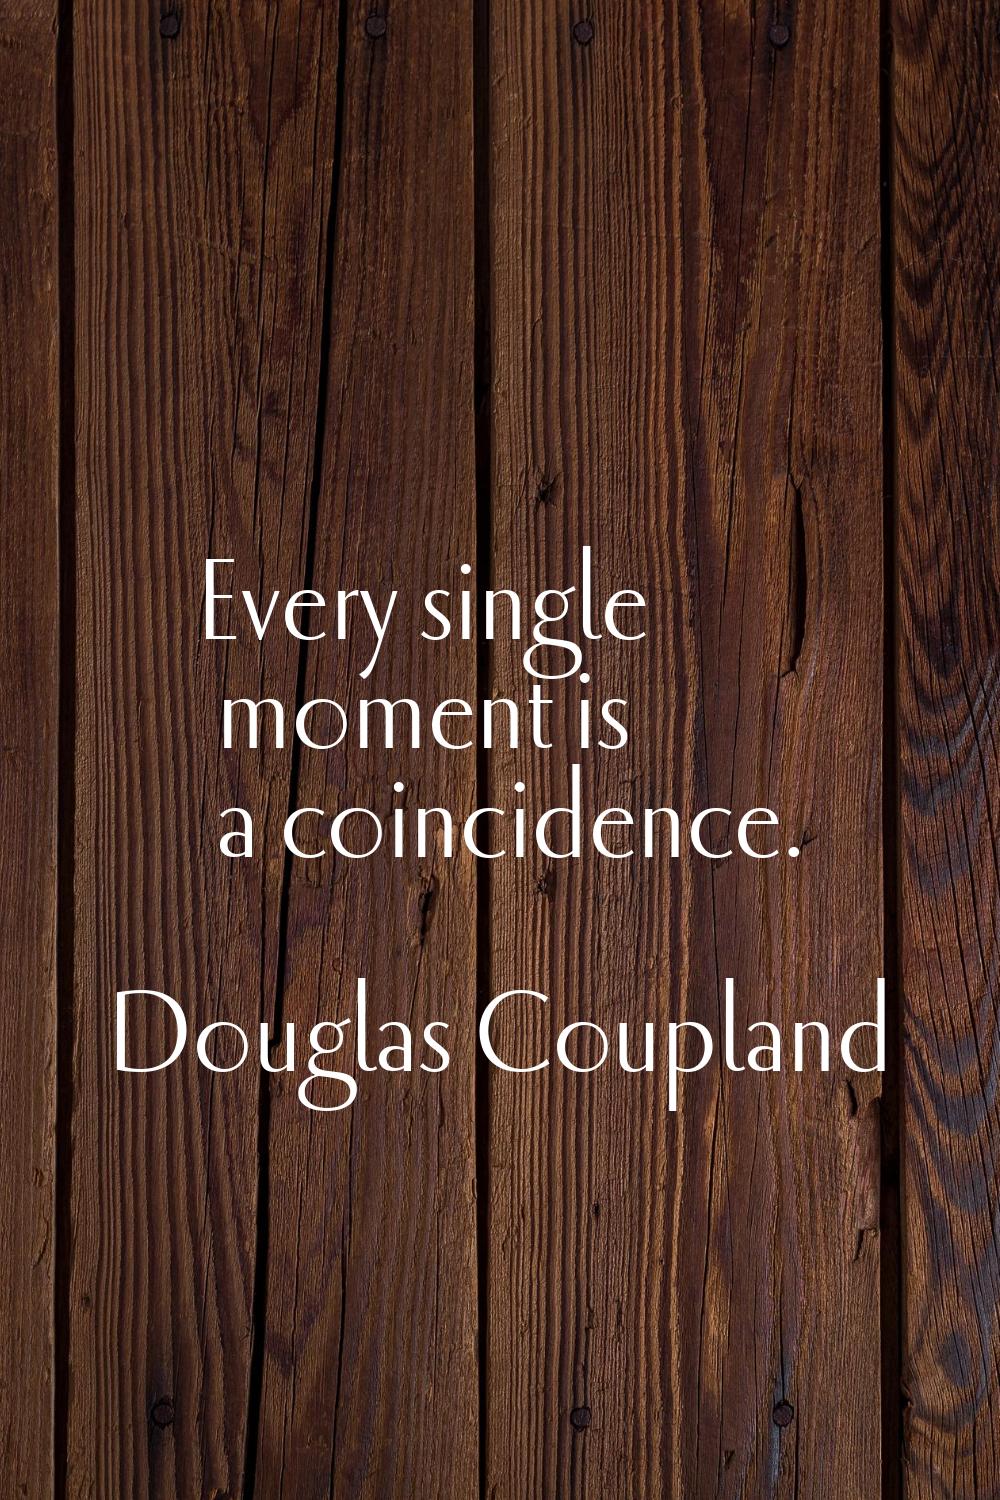 Every single moment is a coincidence.